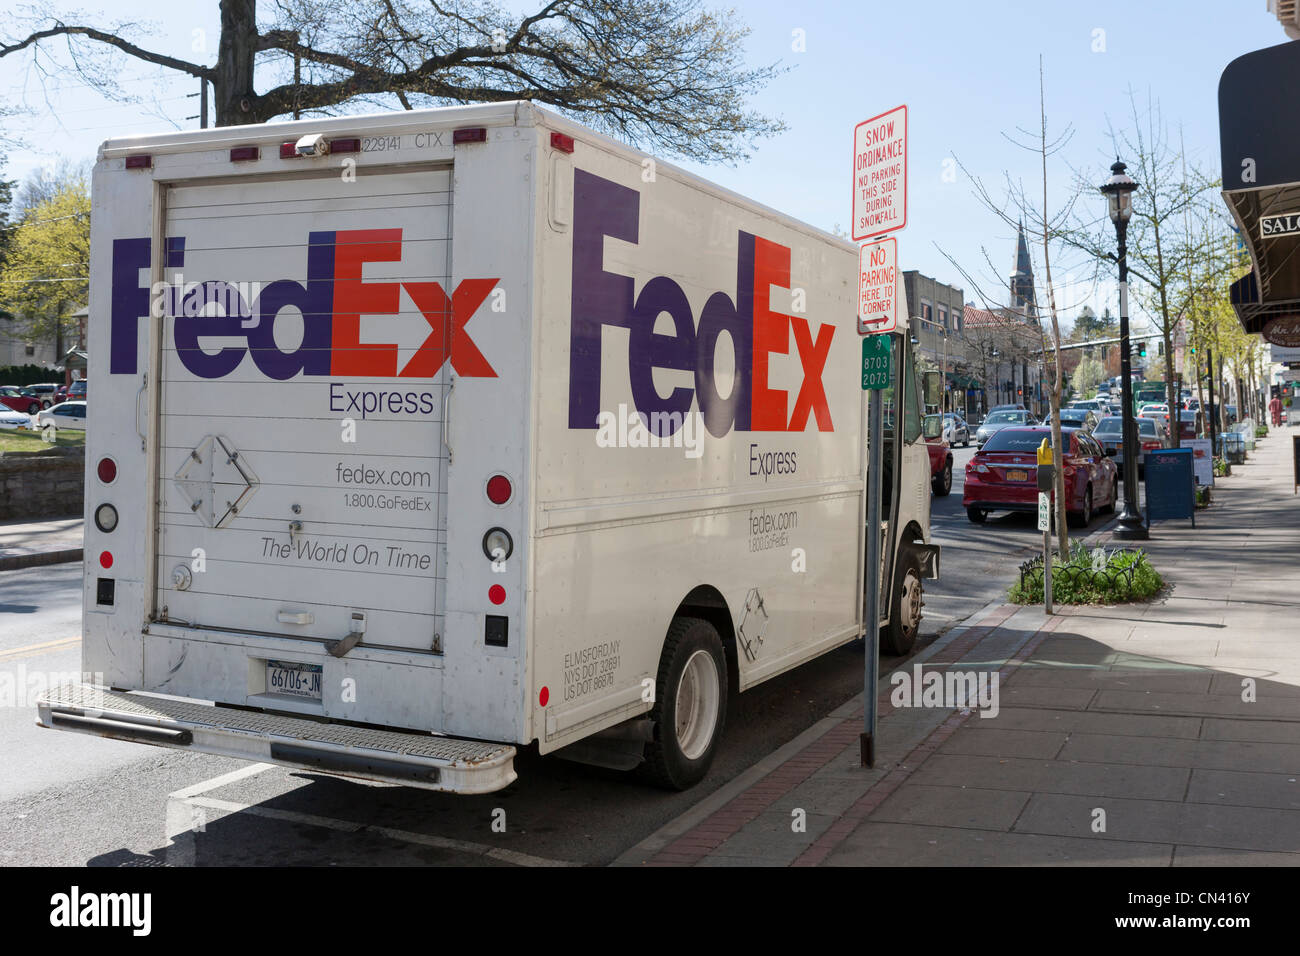 A FedEx Express truck makes a local delivery in Tarrytown, New York. Stock Photo